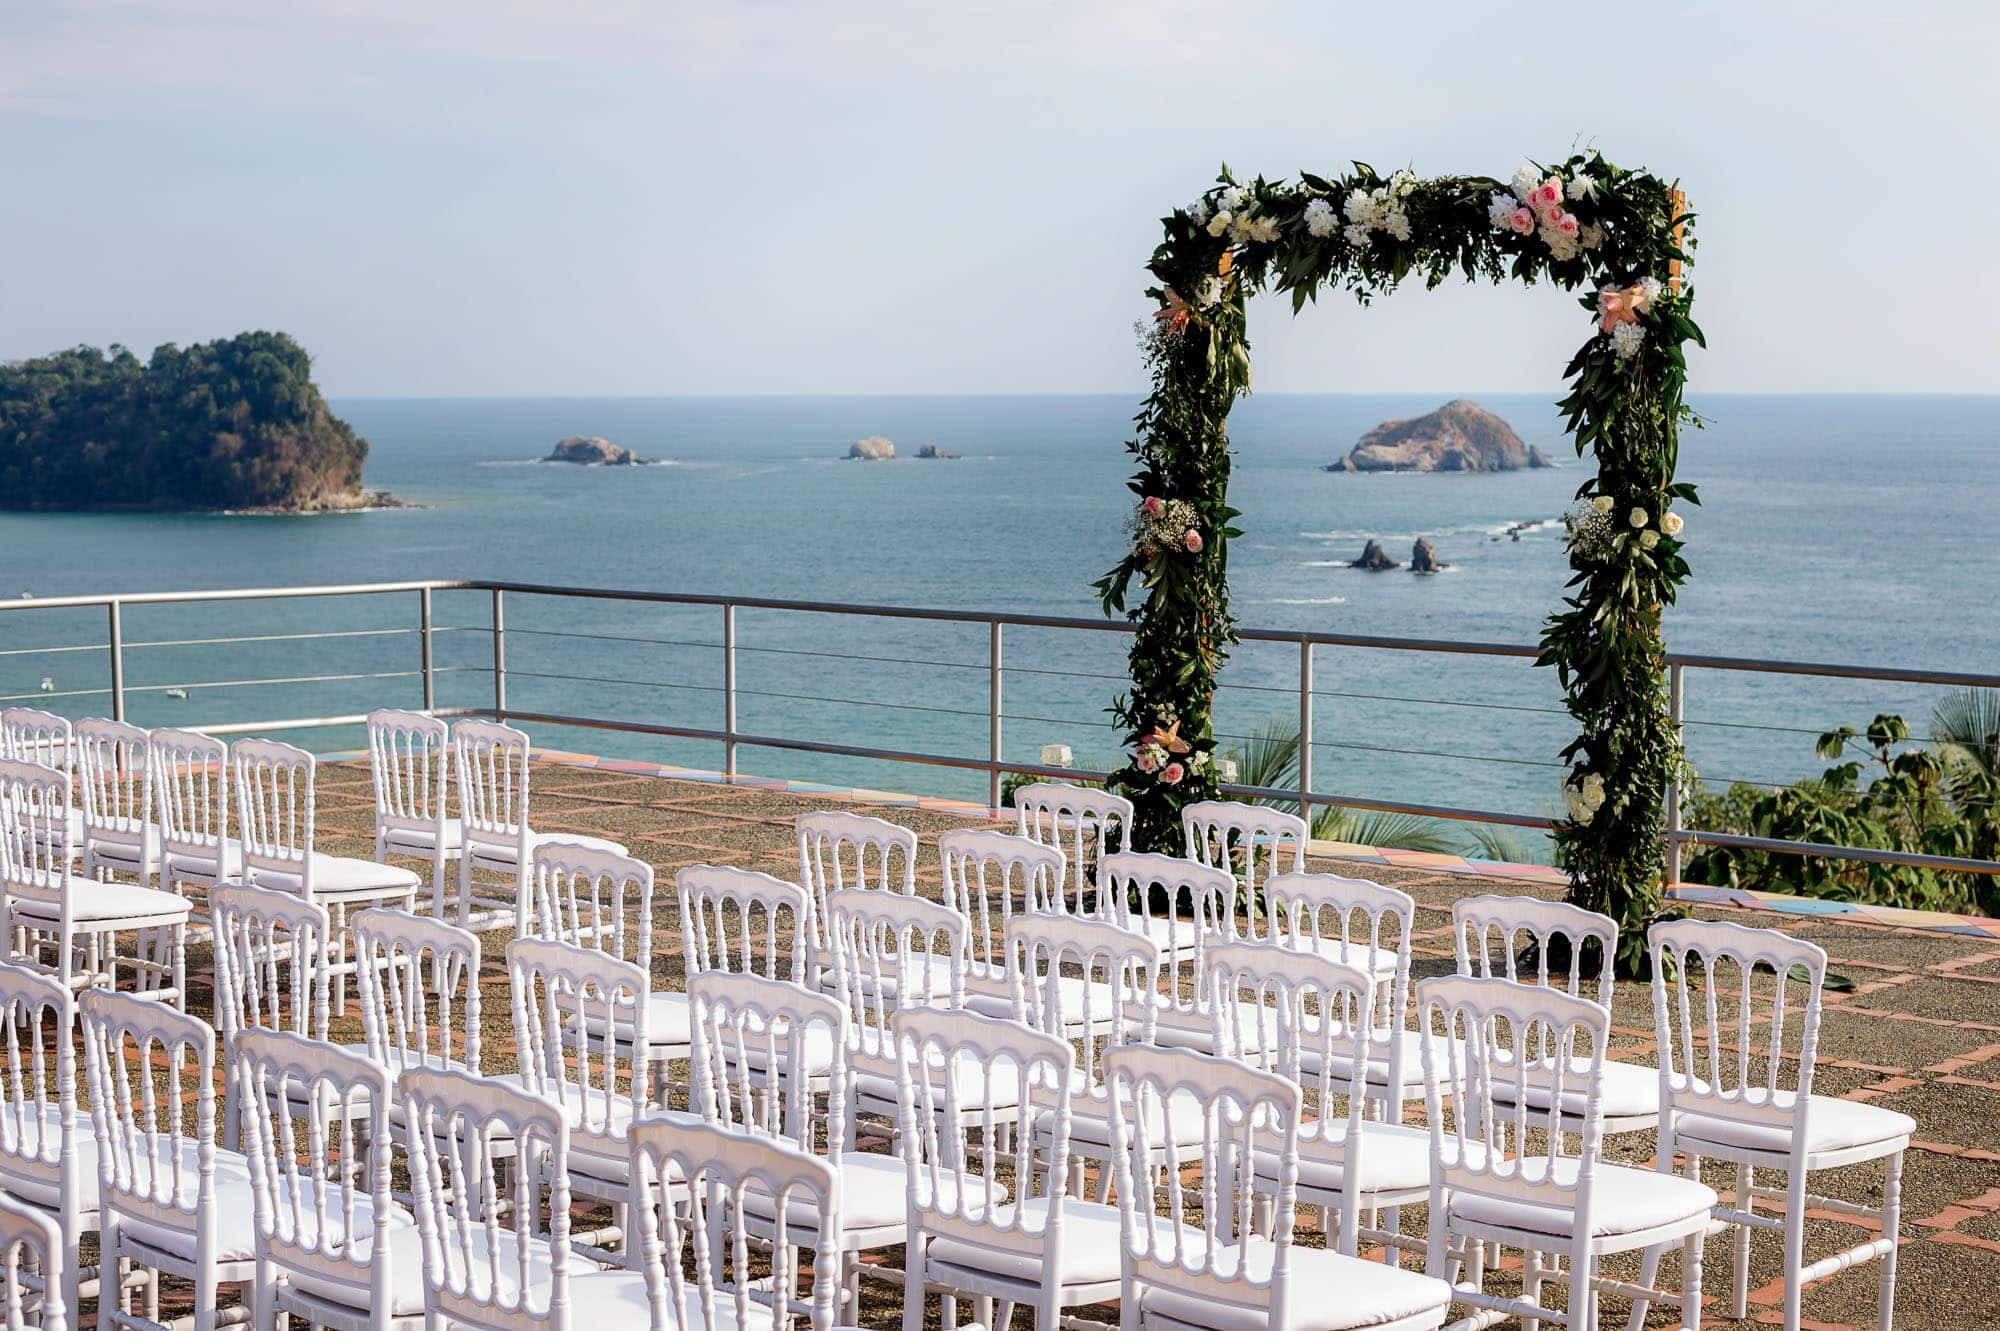 The ceremony site on the helipad at Costa Verde